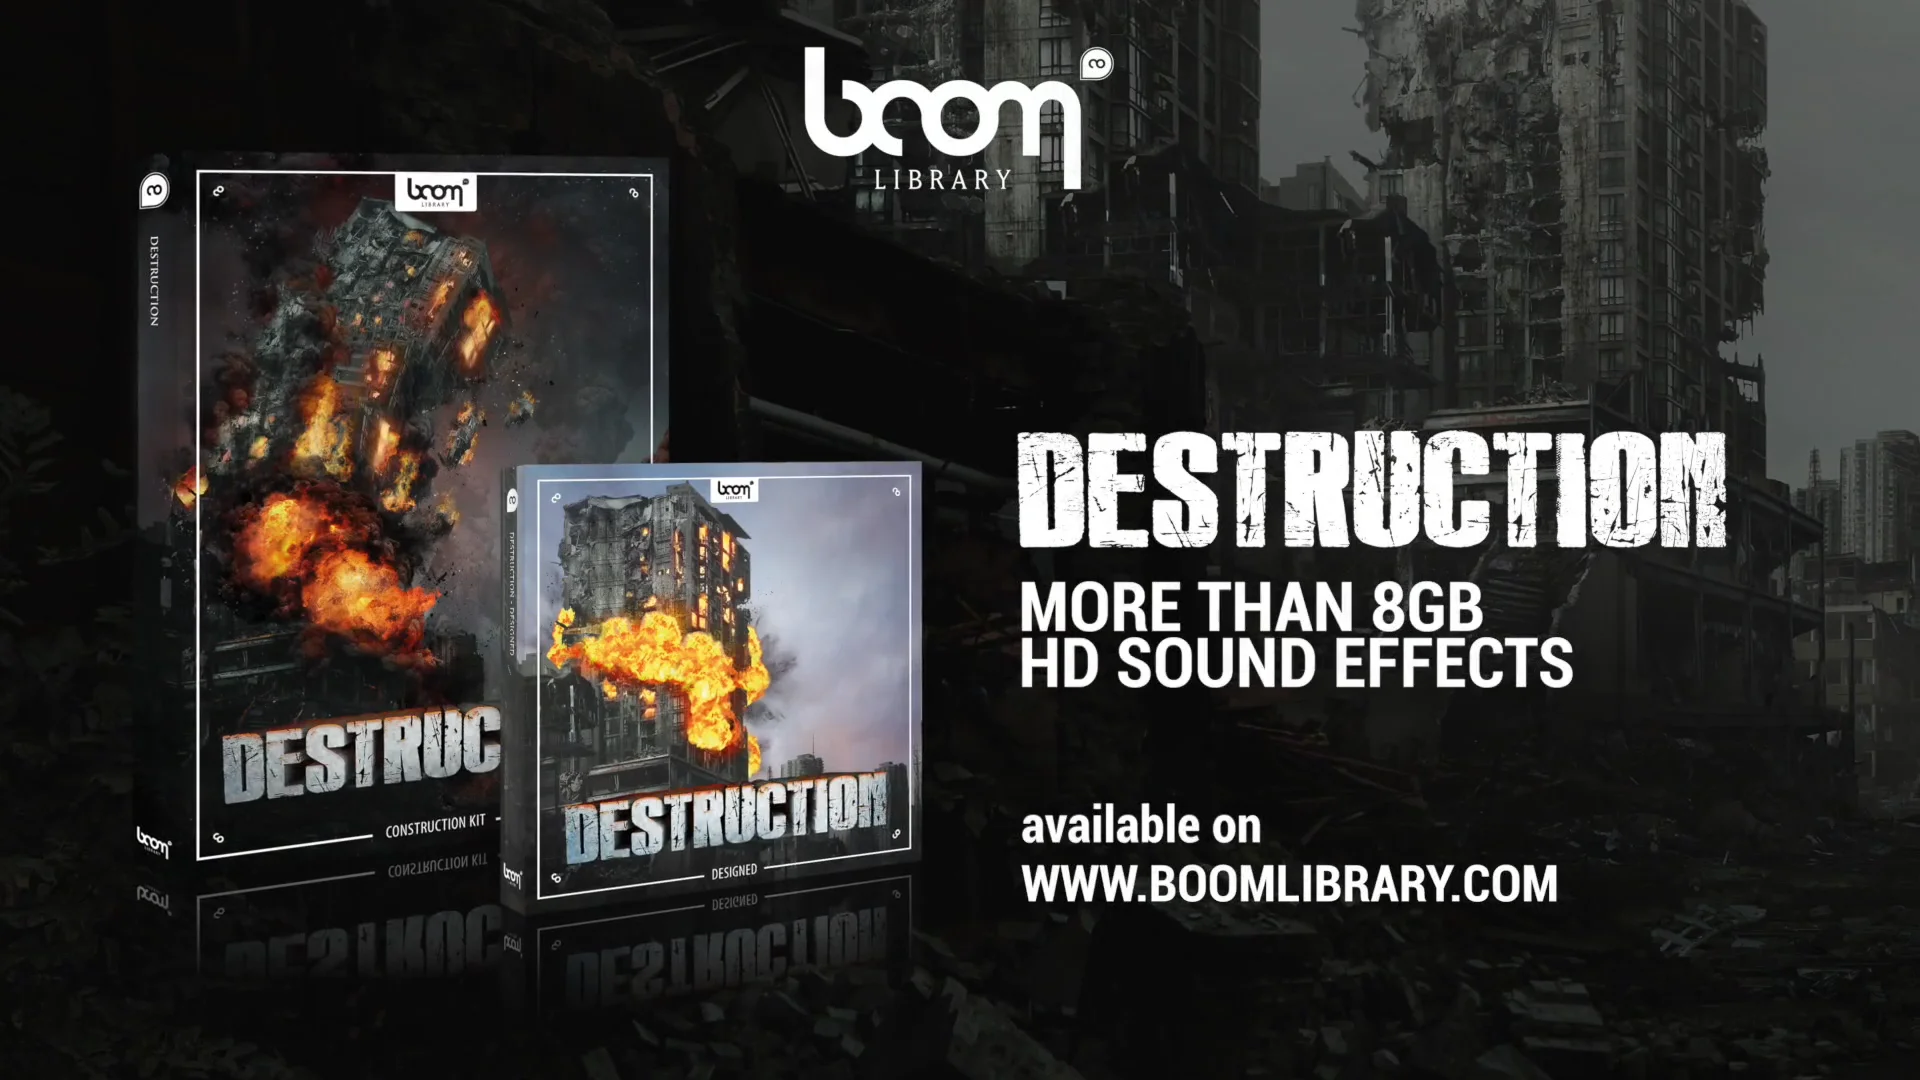 Object destroyed. Boom Library. Boom Library - Destruction Bundle. Boom Library Turbine. Boom Library Kontakt.